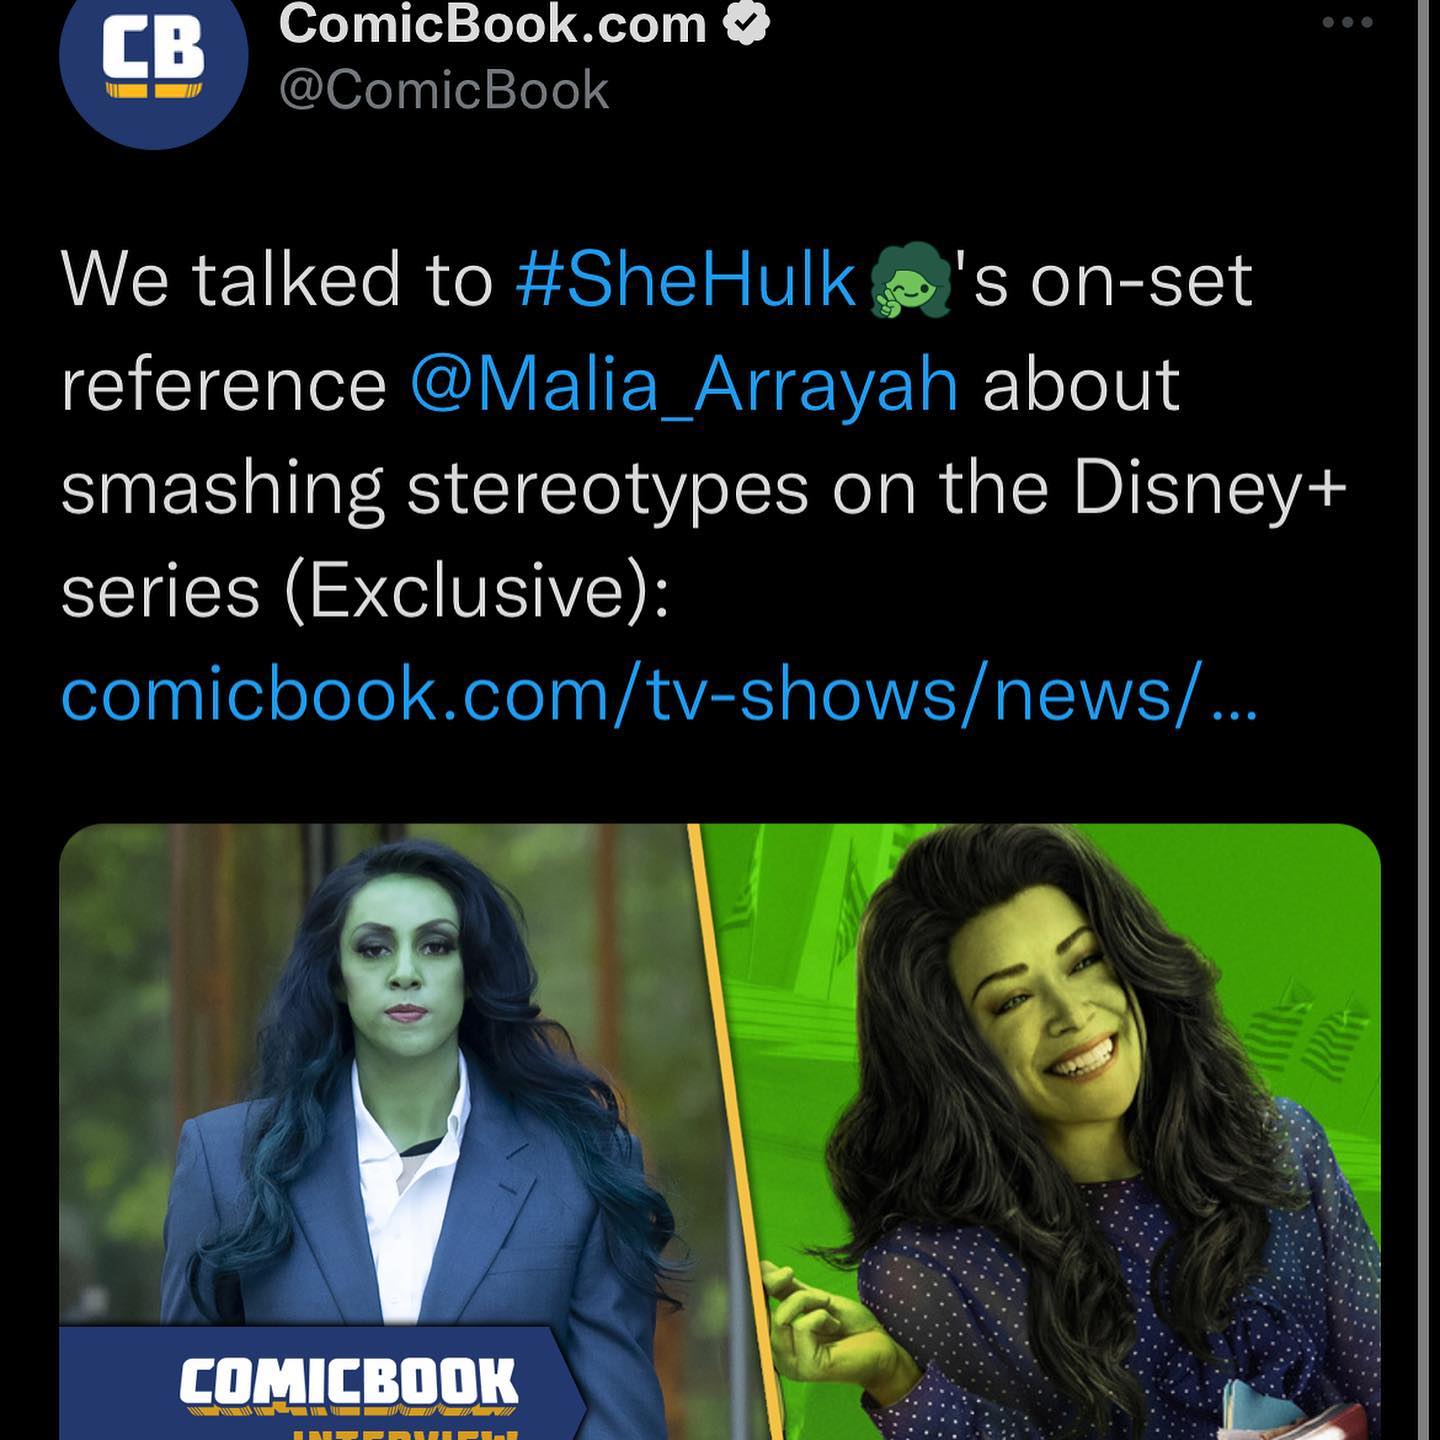 What a wildly fun experience🥰💚. Just wanted to quickly thank everyone for all the love and support of the show @shehulkofficial and sending/commenting your support and love for the show💜💚💚💚 
.
If you’re interested in checking out this interview (which I absolutely loved) where I was asked about body image :) hit the link in the bio💚💜
.
Thank you @comicbook for wanting to chat 🥰💚